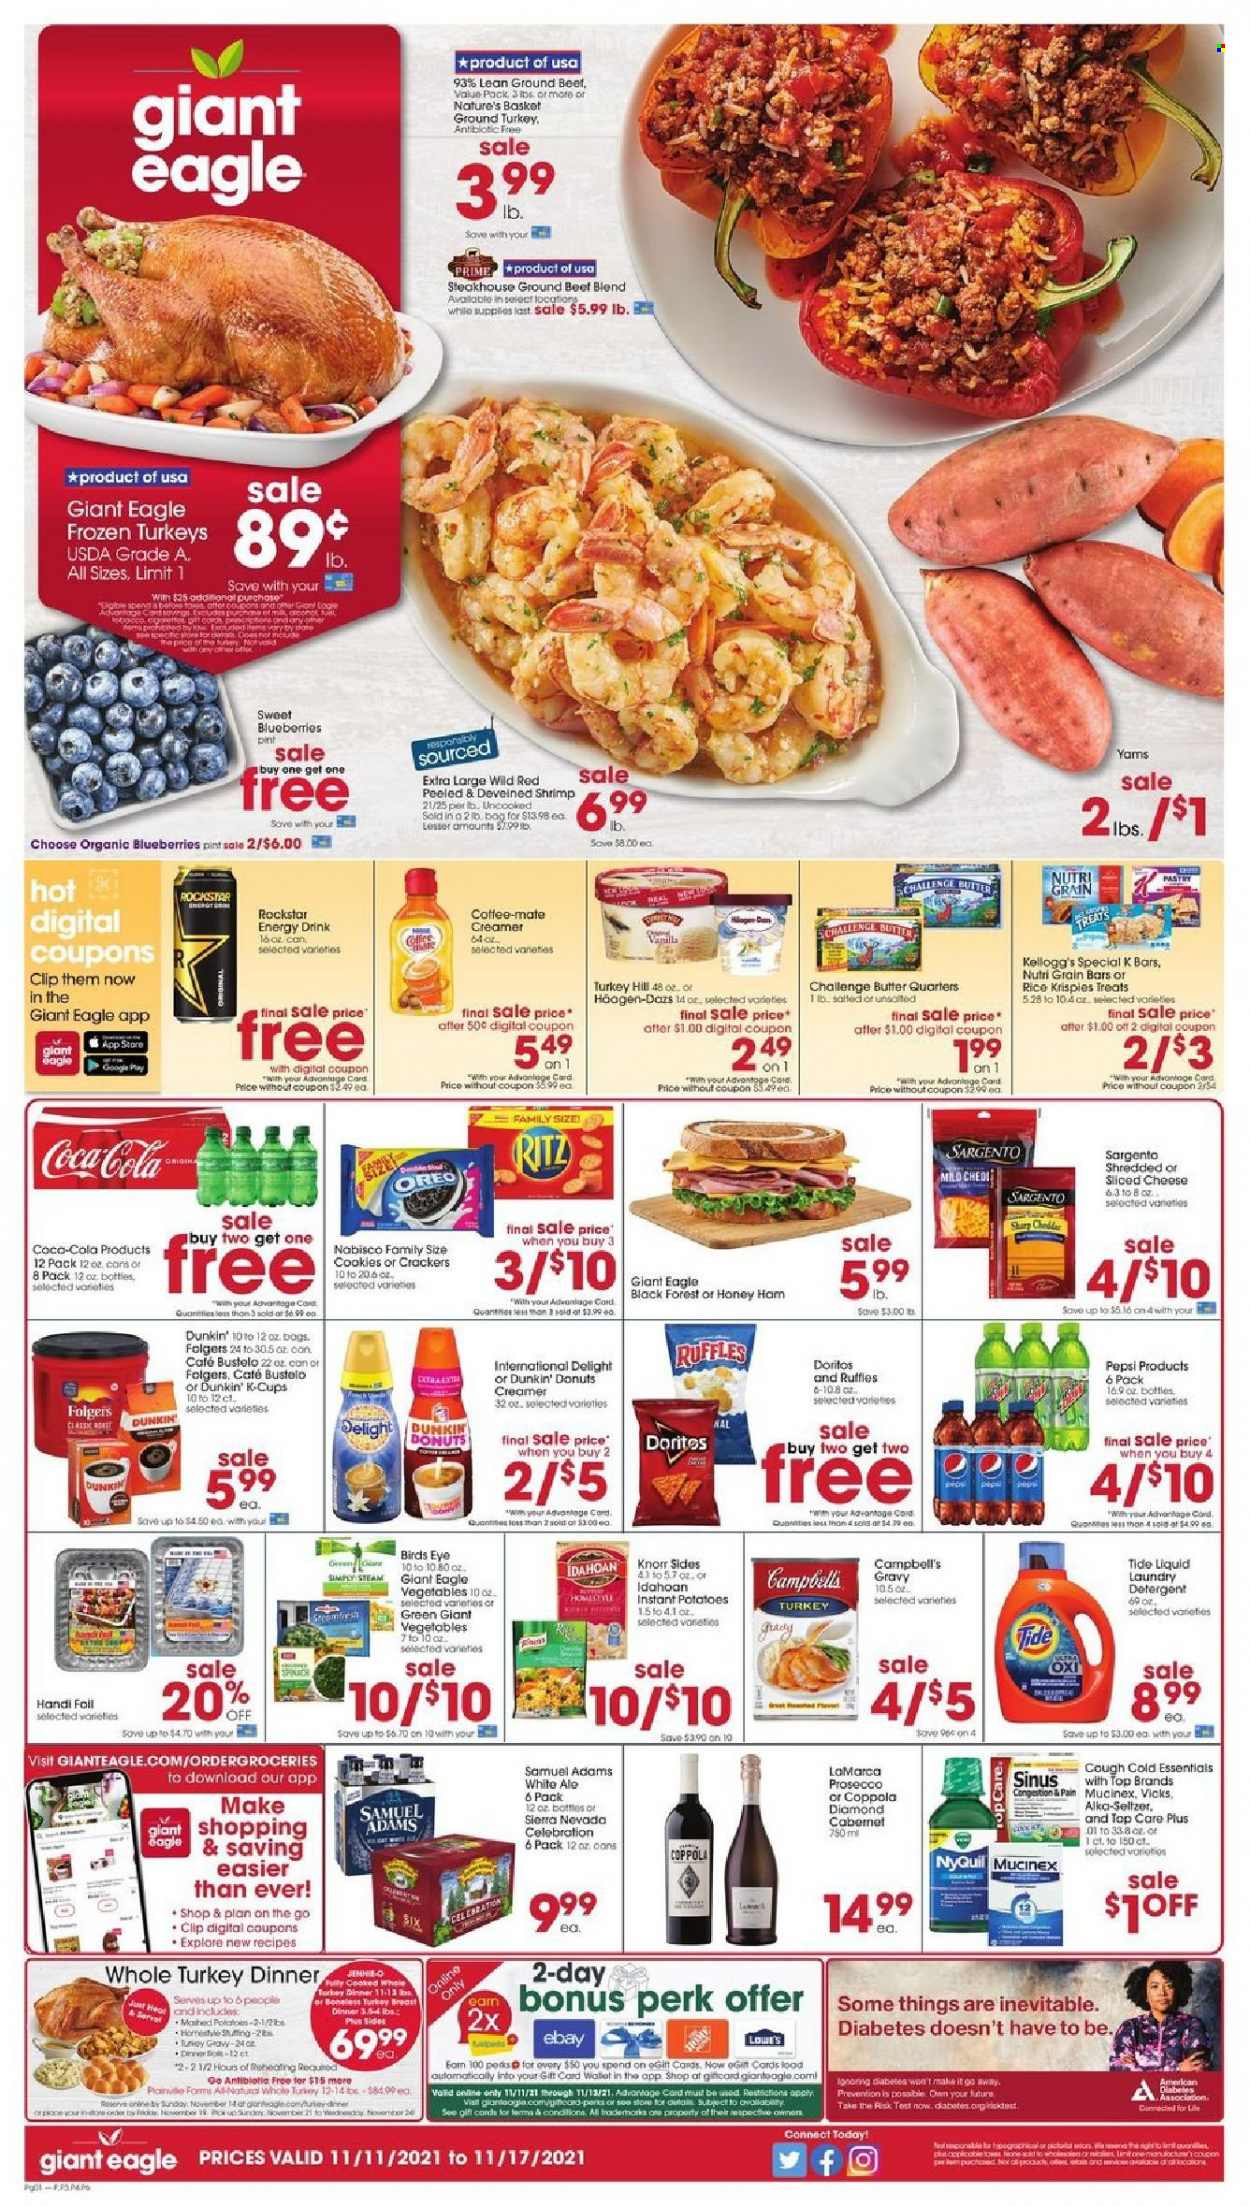 thumbnail - Giant Eagle Flyer - 11/11/2021 - 11/17/2021 - Sales products - donut, Dunkin' Donuts, blueberries, cod, shrimps, Campbell's, Knorr, Bird's Eye, ham, sliced cheese, Sargento, Oreo, Coffee-Mate, butter, creamer, cookies, Celebration, crackers, Kellogg's, RITZ, Doritos, Ruffles, Rice Krispies, Nutri-Grain, Coca-Cola, Pepsi, energy drink, Rockstar, Folgers, coffee capsules, K-Cups, Cabernet Sauvignon, prosecco, ground turkey, turkey breast, whole turkey, beef meat, ground beef, detergent, Tide, laundry detergent, Vicks, basket, Sharp, Mucinex, NyQuil, Alka-seltzer. Page 1.